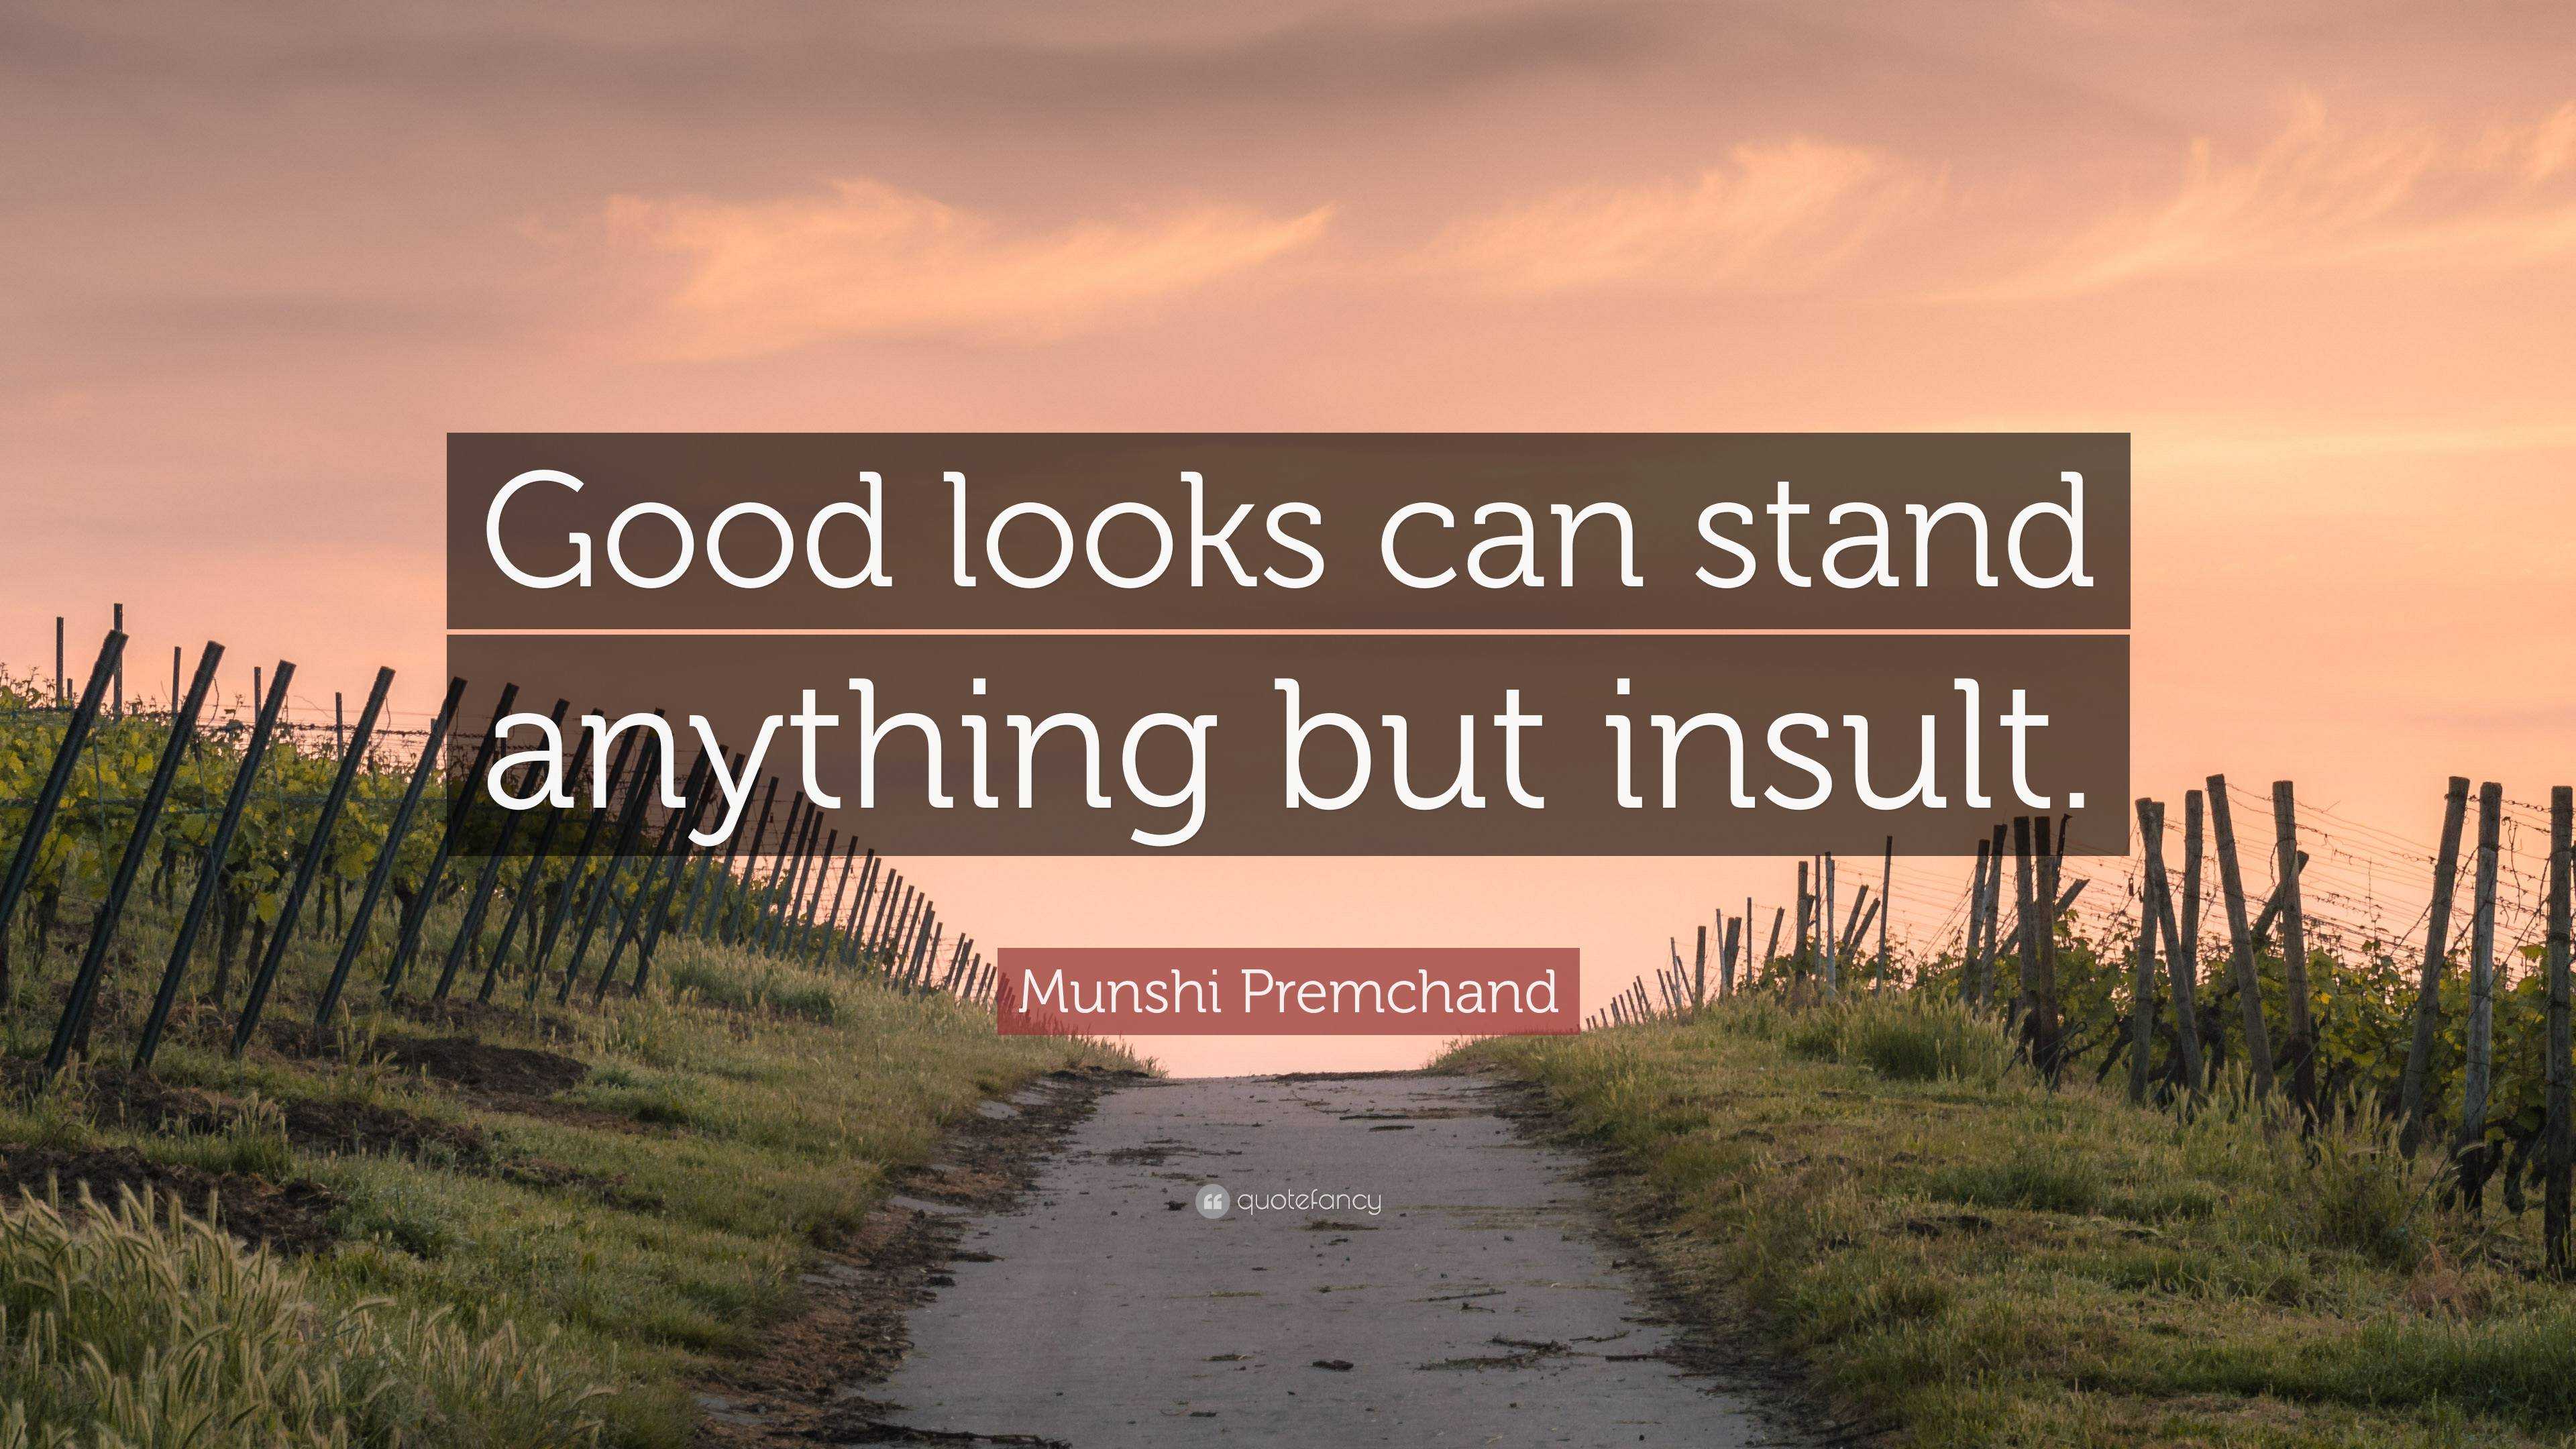 Munshi Premchand Quote: “Good looks can stand anything but insult.”